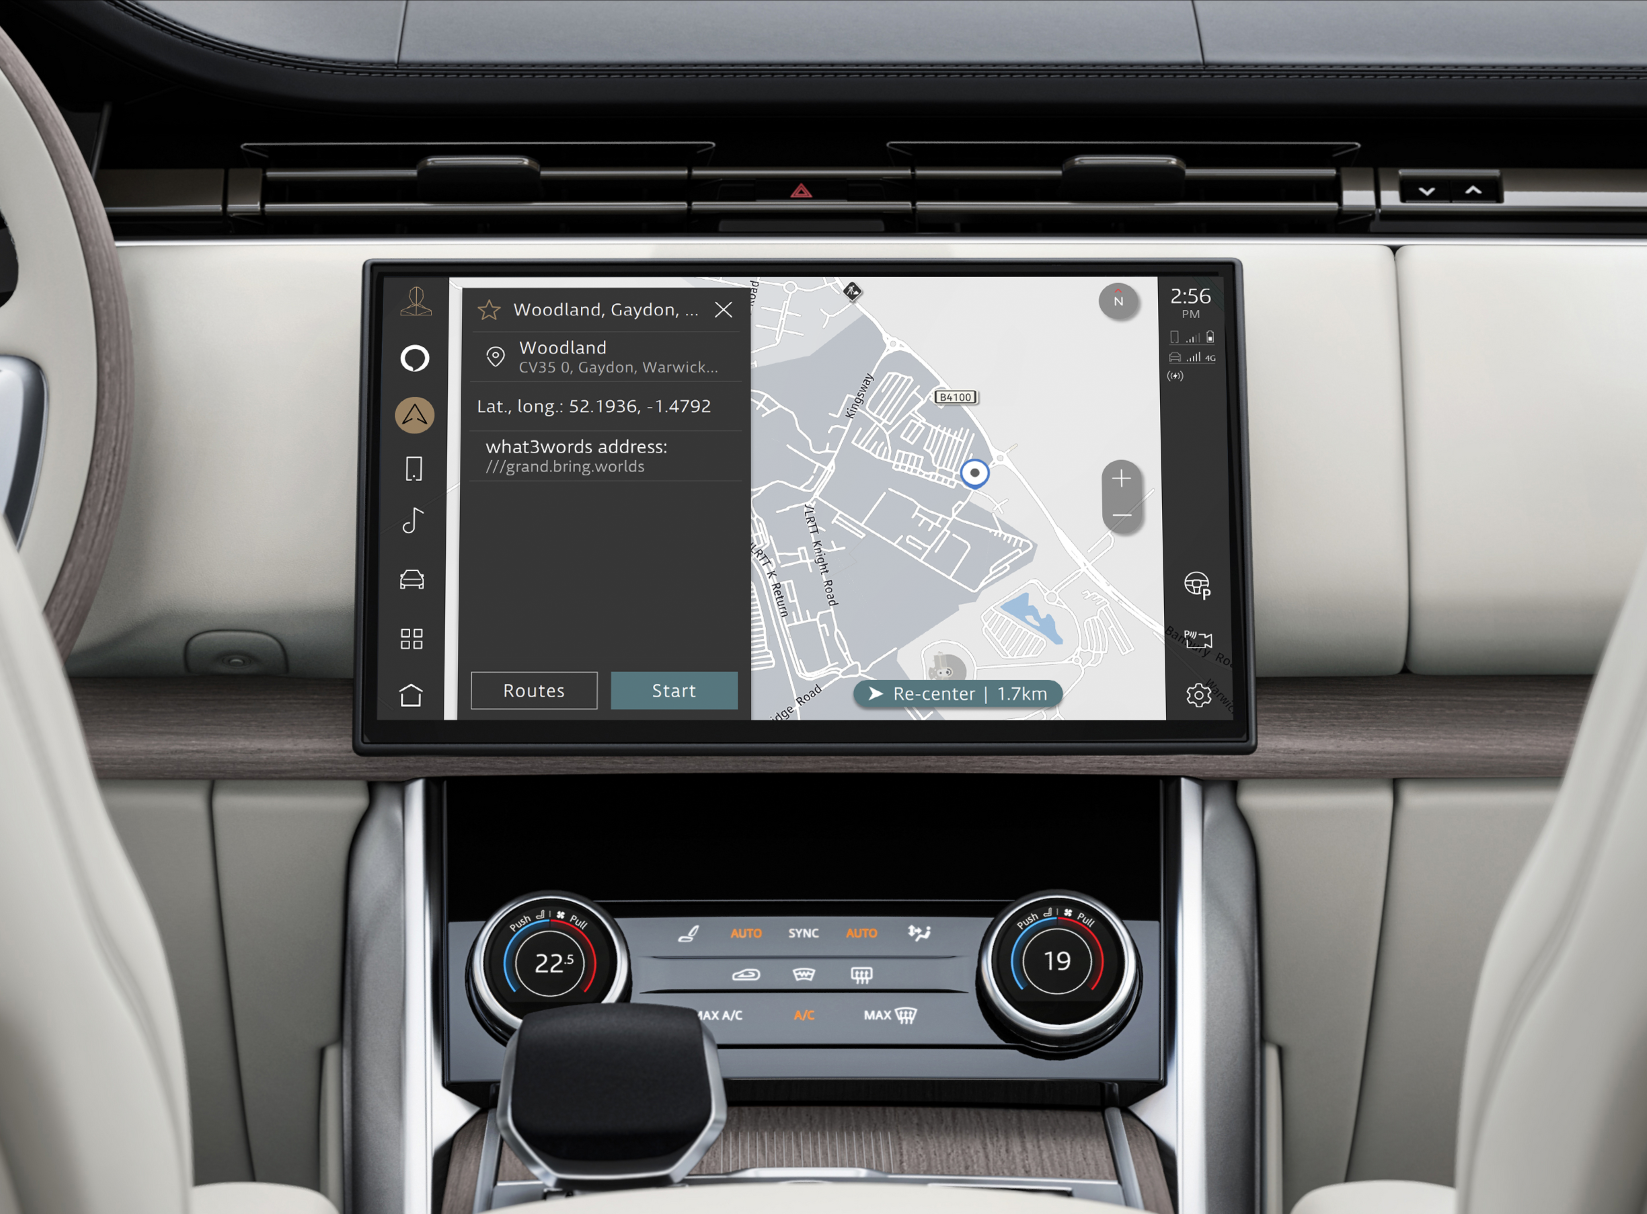  JLR What3Words Global Location Technology